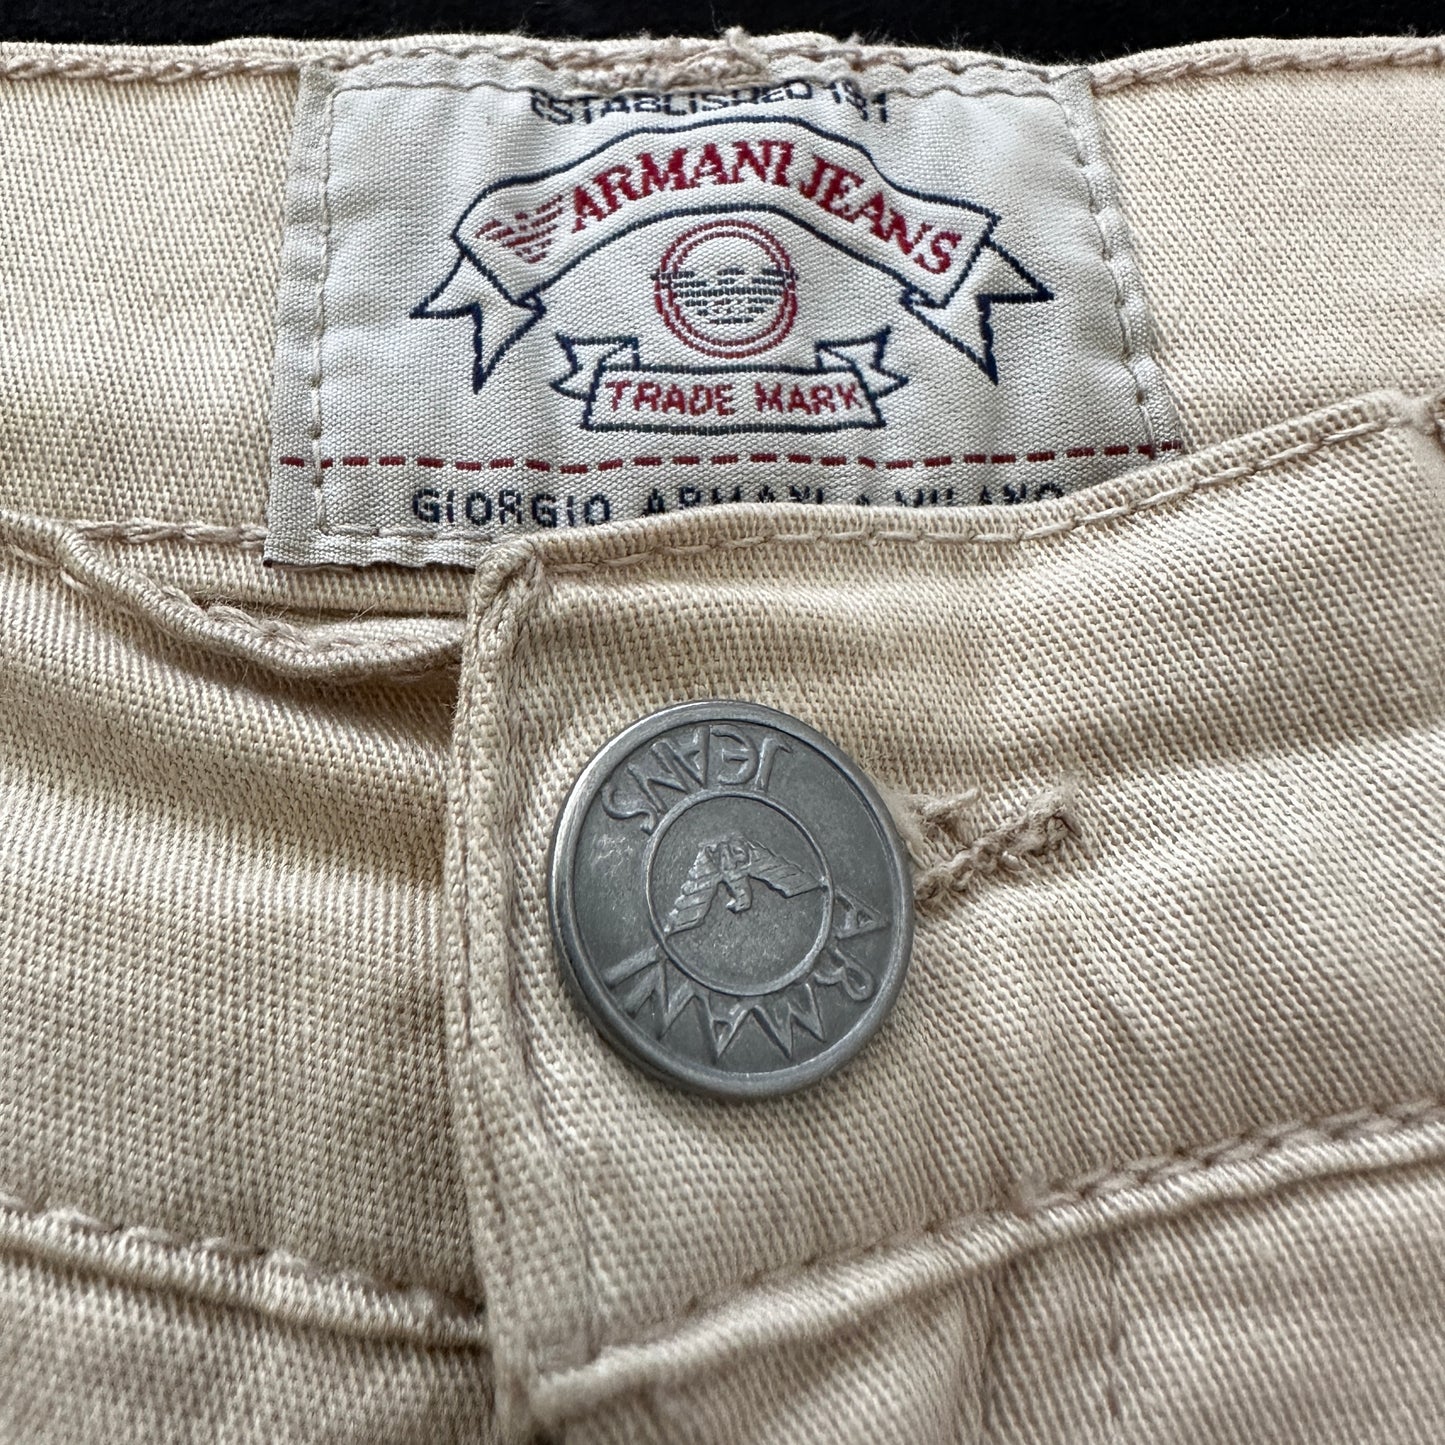 Armani Jeans Vintage 80s Womens Pants - 27 - Made in Italy